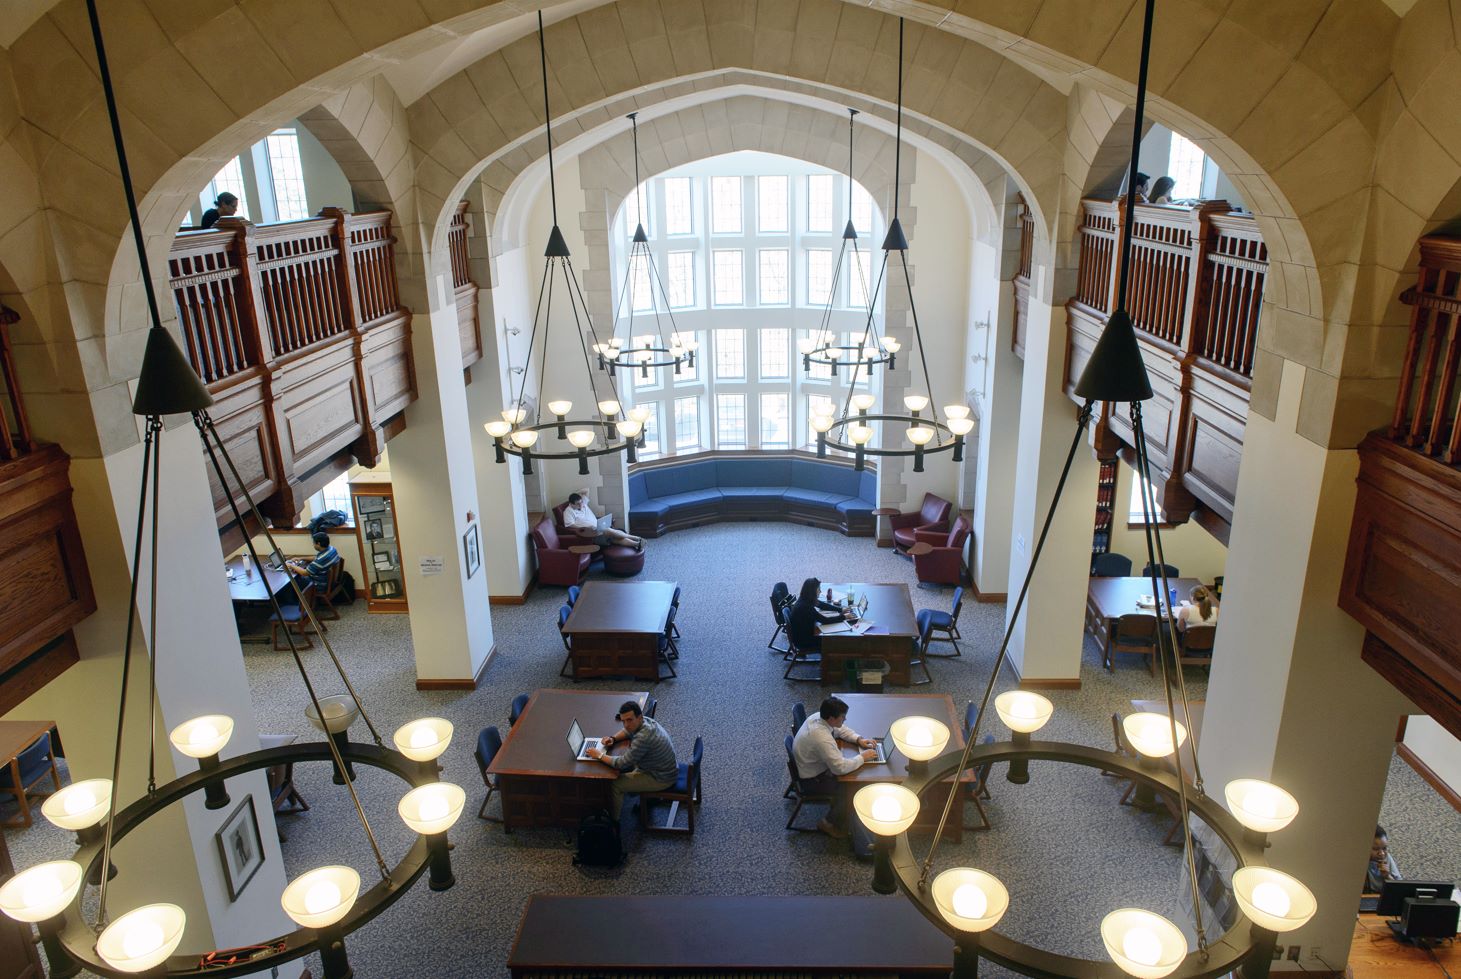 Bird's eye image of inside of library with students studying at desks. 